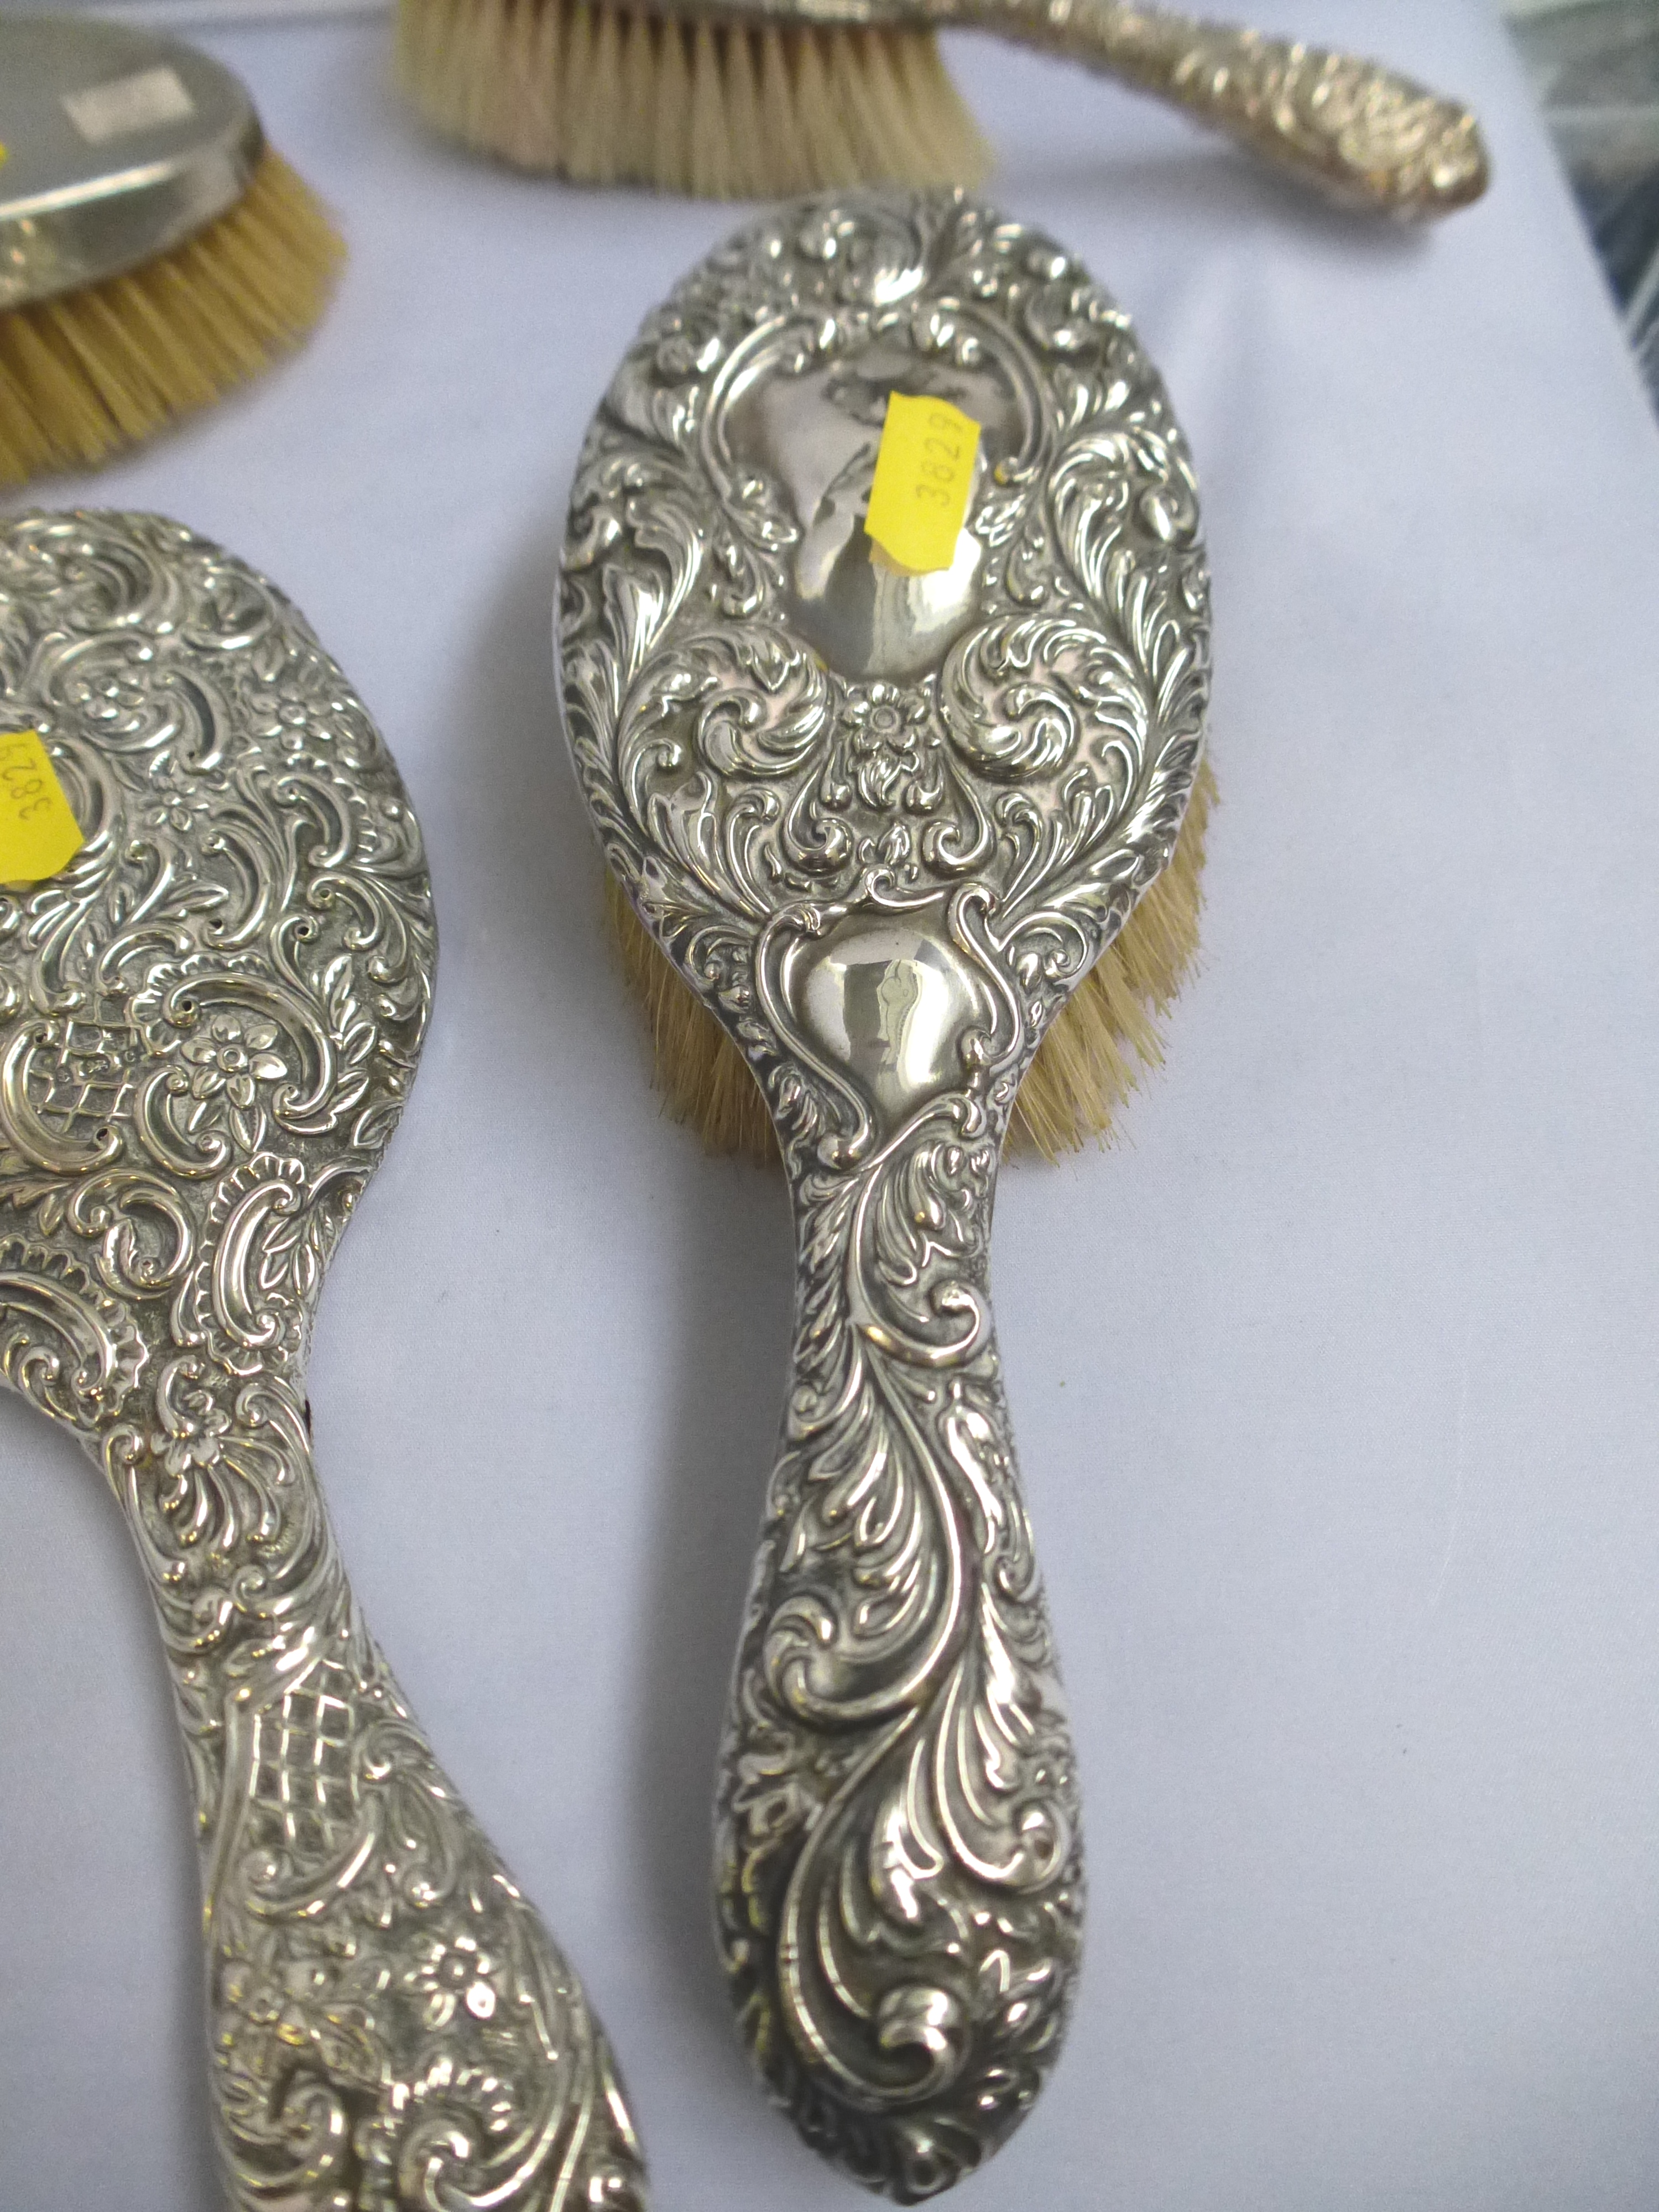 4 SILVER BACK BRUSHES AND A SILVER MIRROR - Image 2 of 14